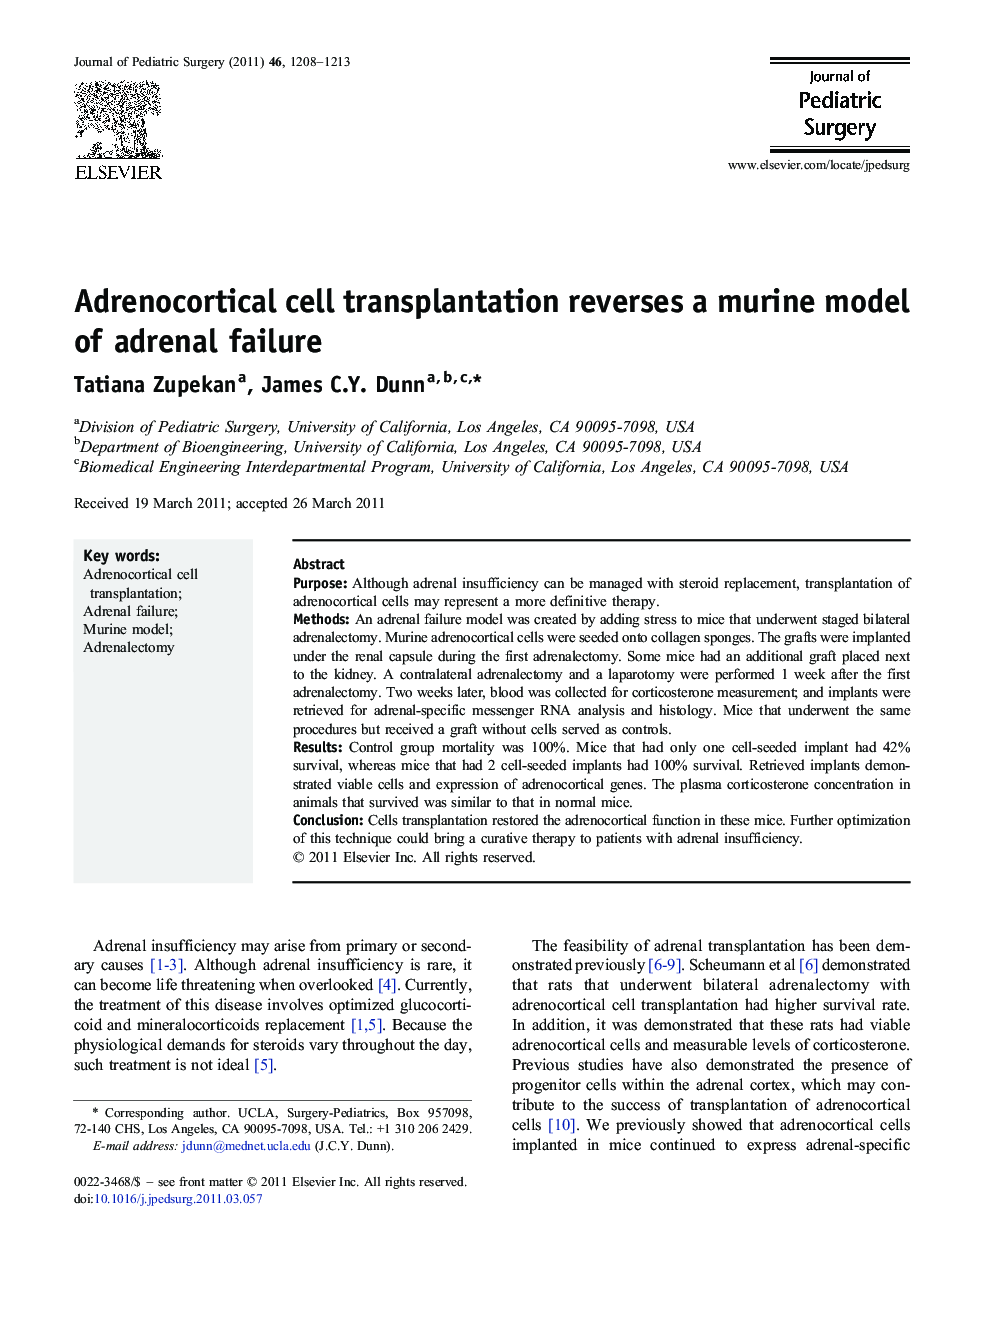 Adrenocortical cell transplantation reverses a murine model of adrenal failure